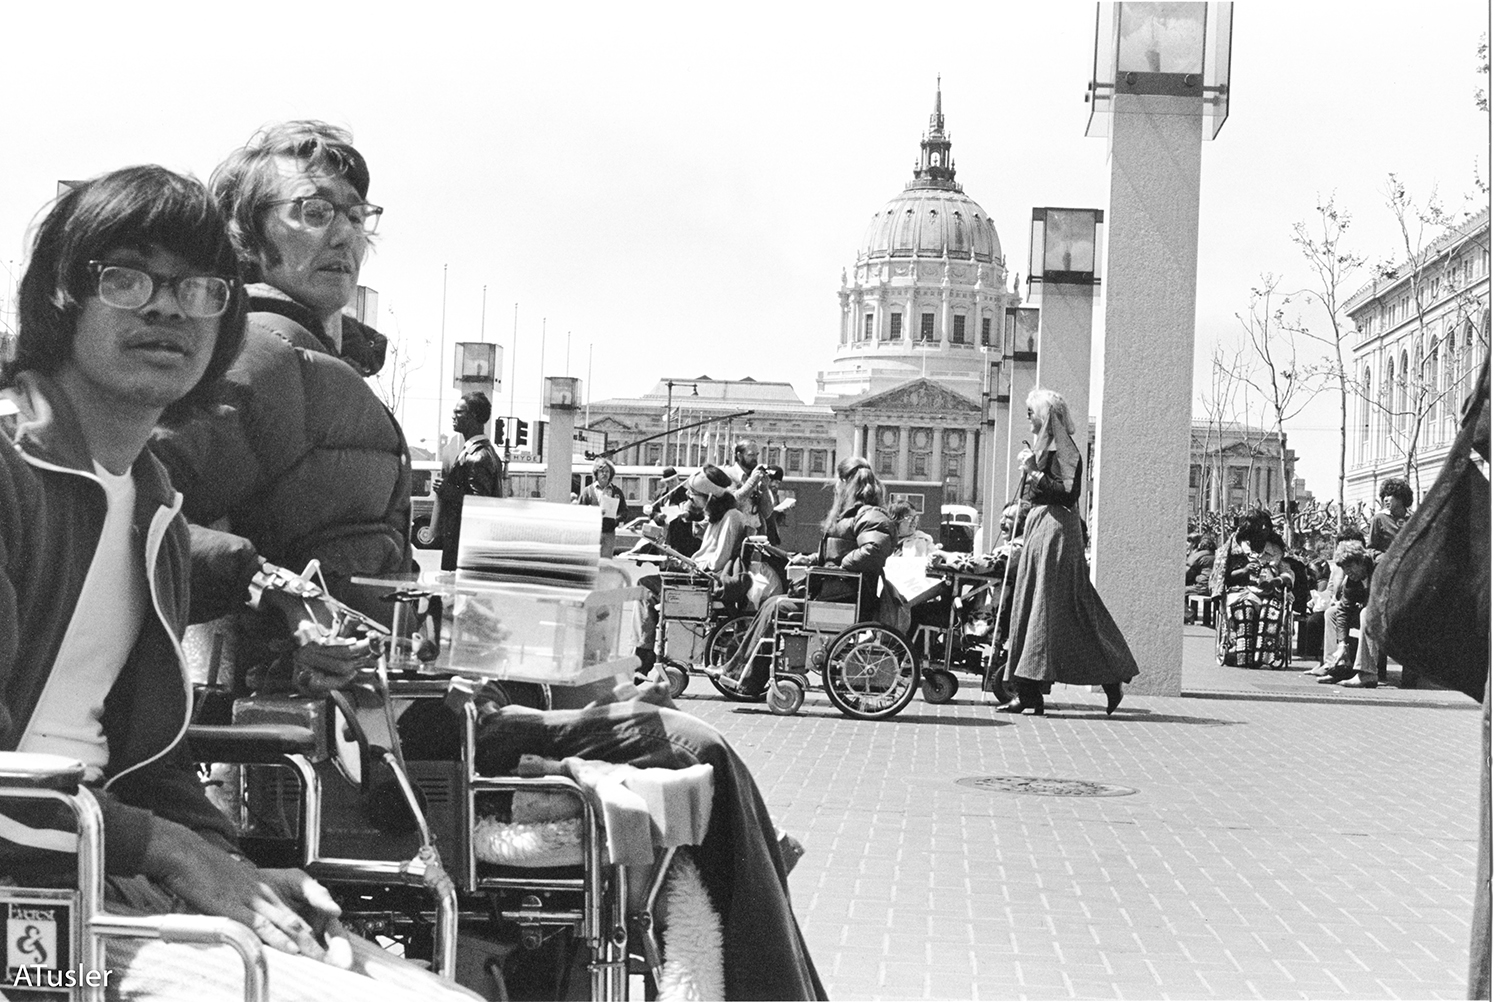 Black and white photo of crowd in front of a building with rotunda, many of the people are wheelchair users.